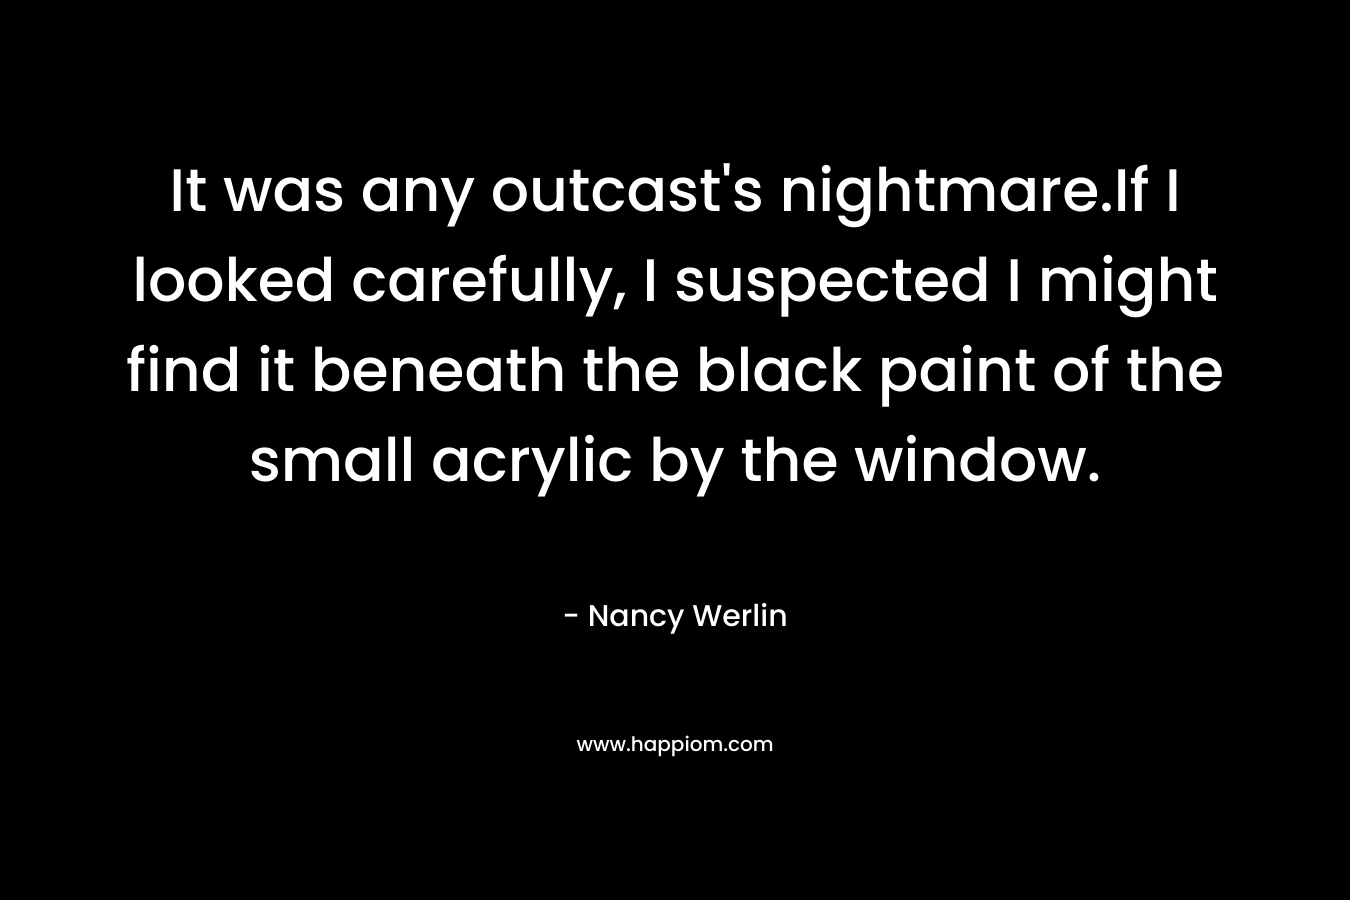 It was any outcast’s nightmare.If I looked carefully, I suspected I might find it beneath the black paint of the small acrylic by the window. – Nancy Werlin